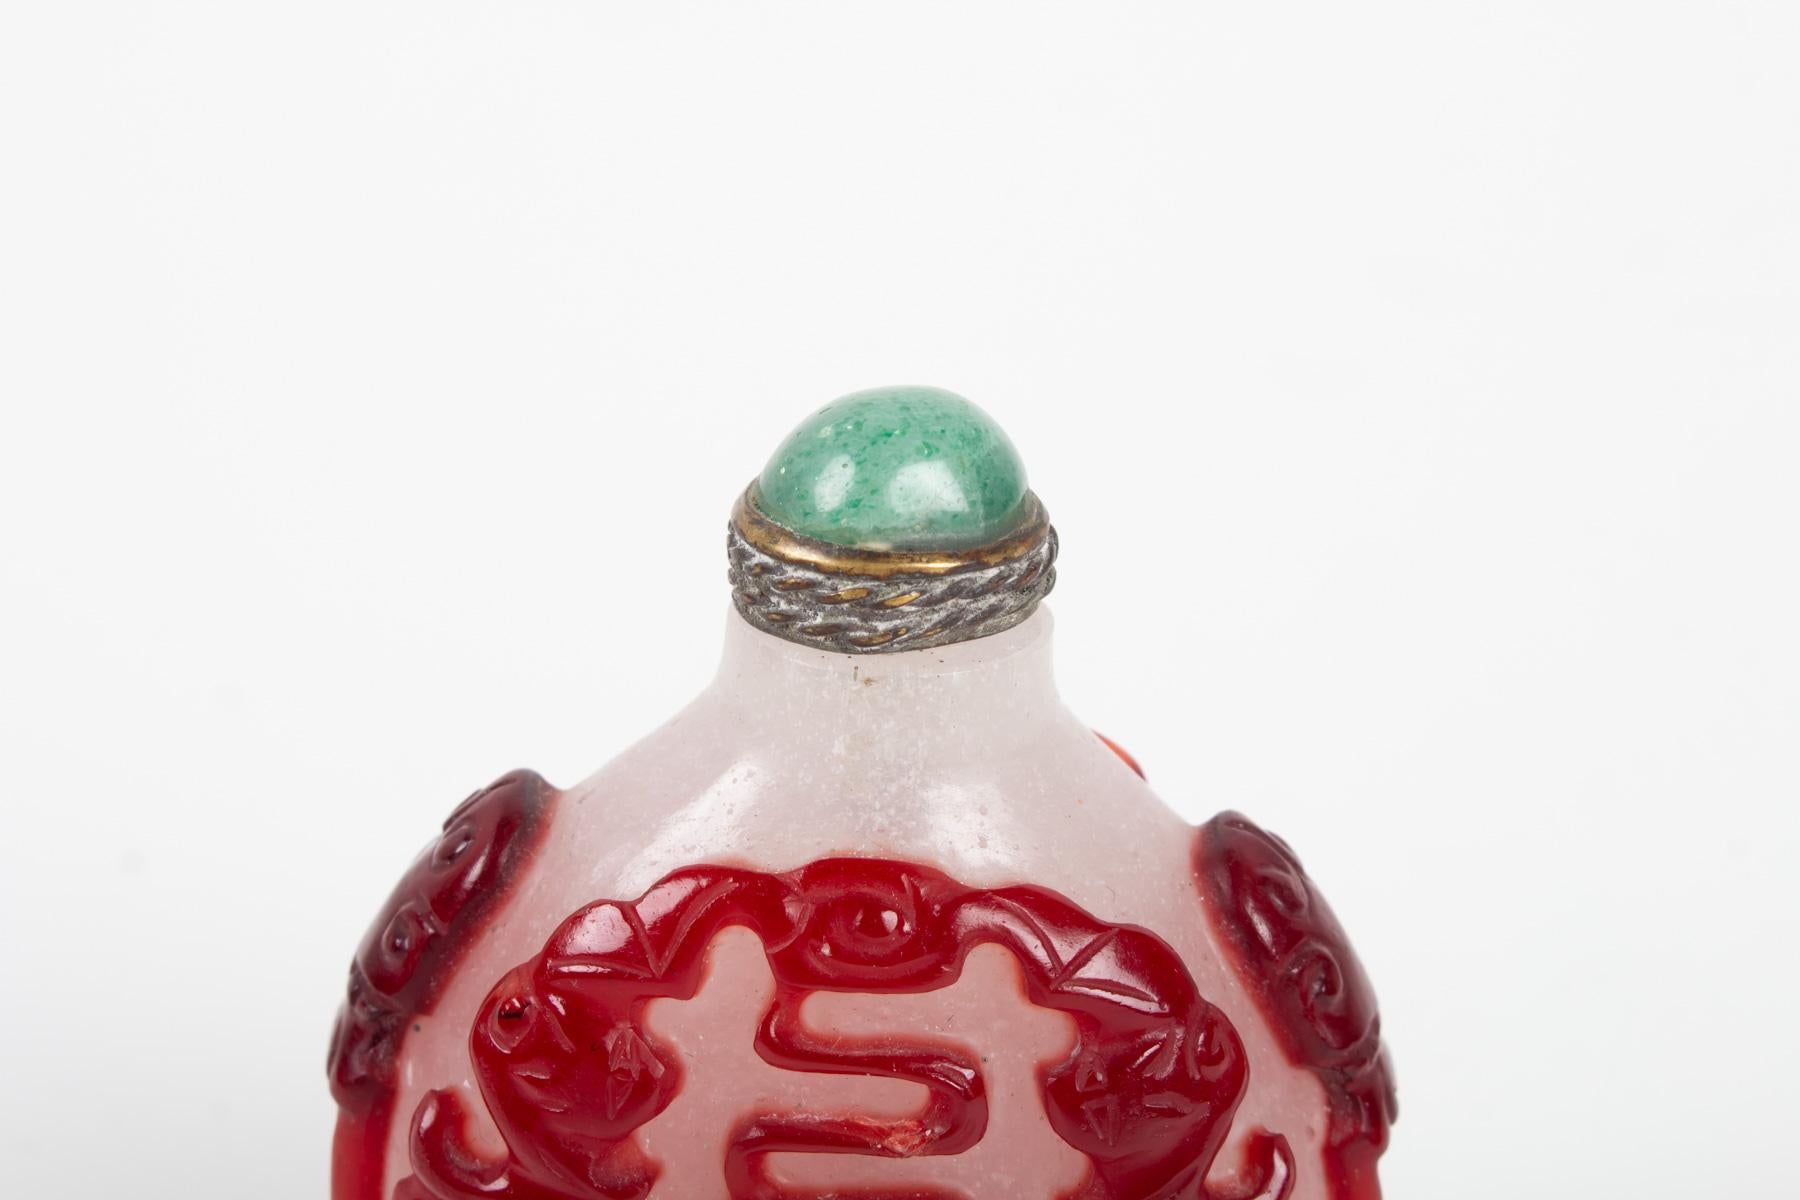 Chinese Glass Snuffbox Overlay White Opaque and Red Blood with Decoration of a Dragon